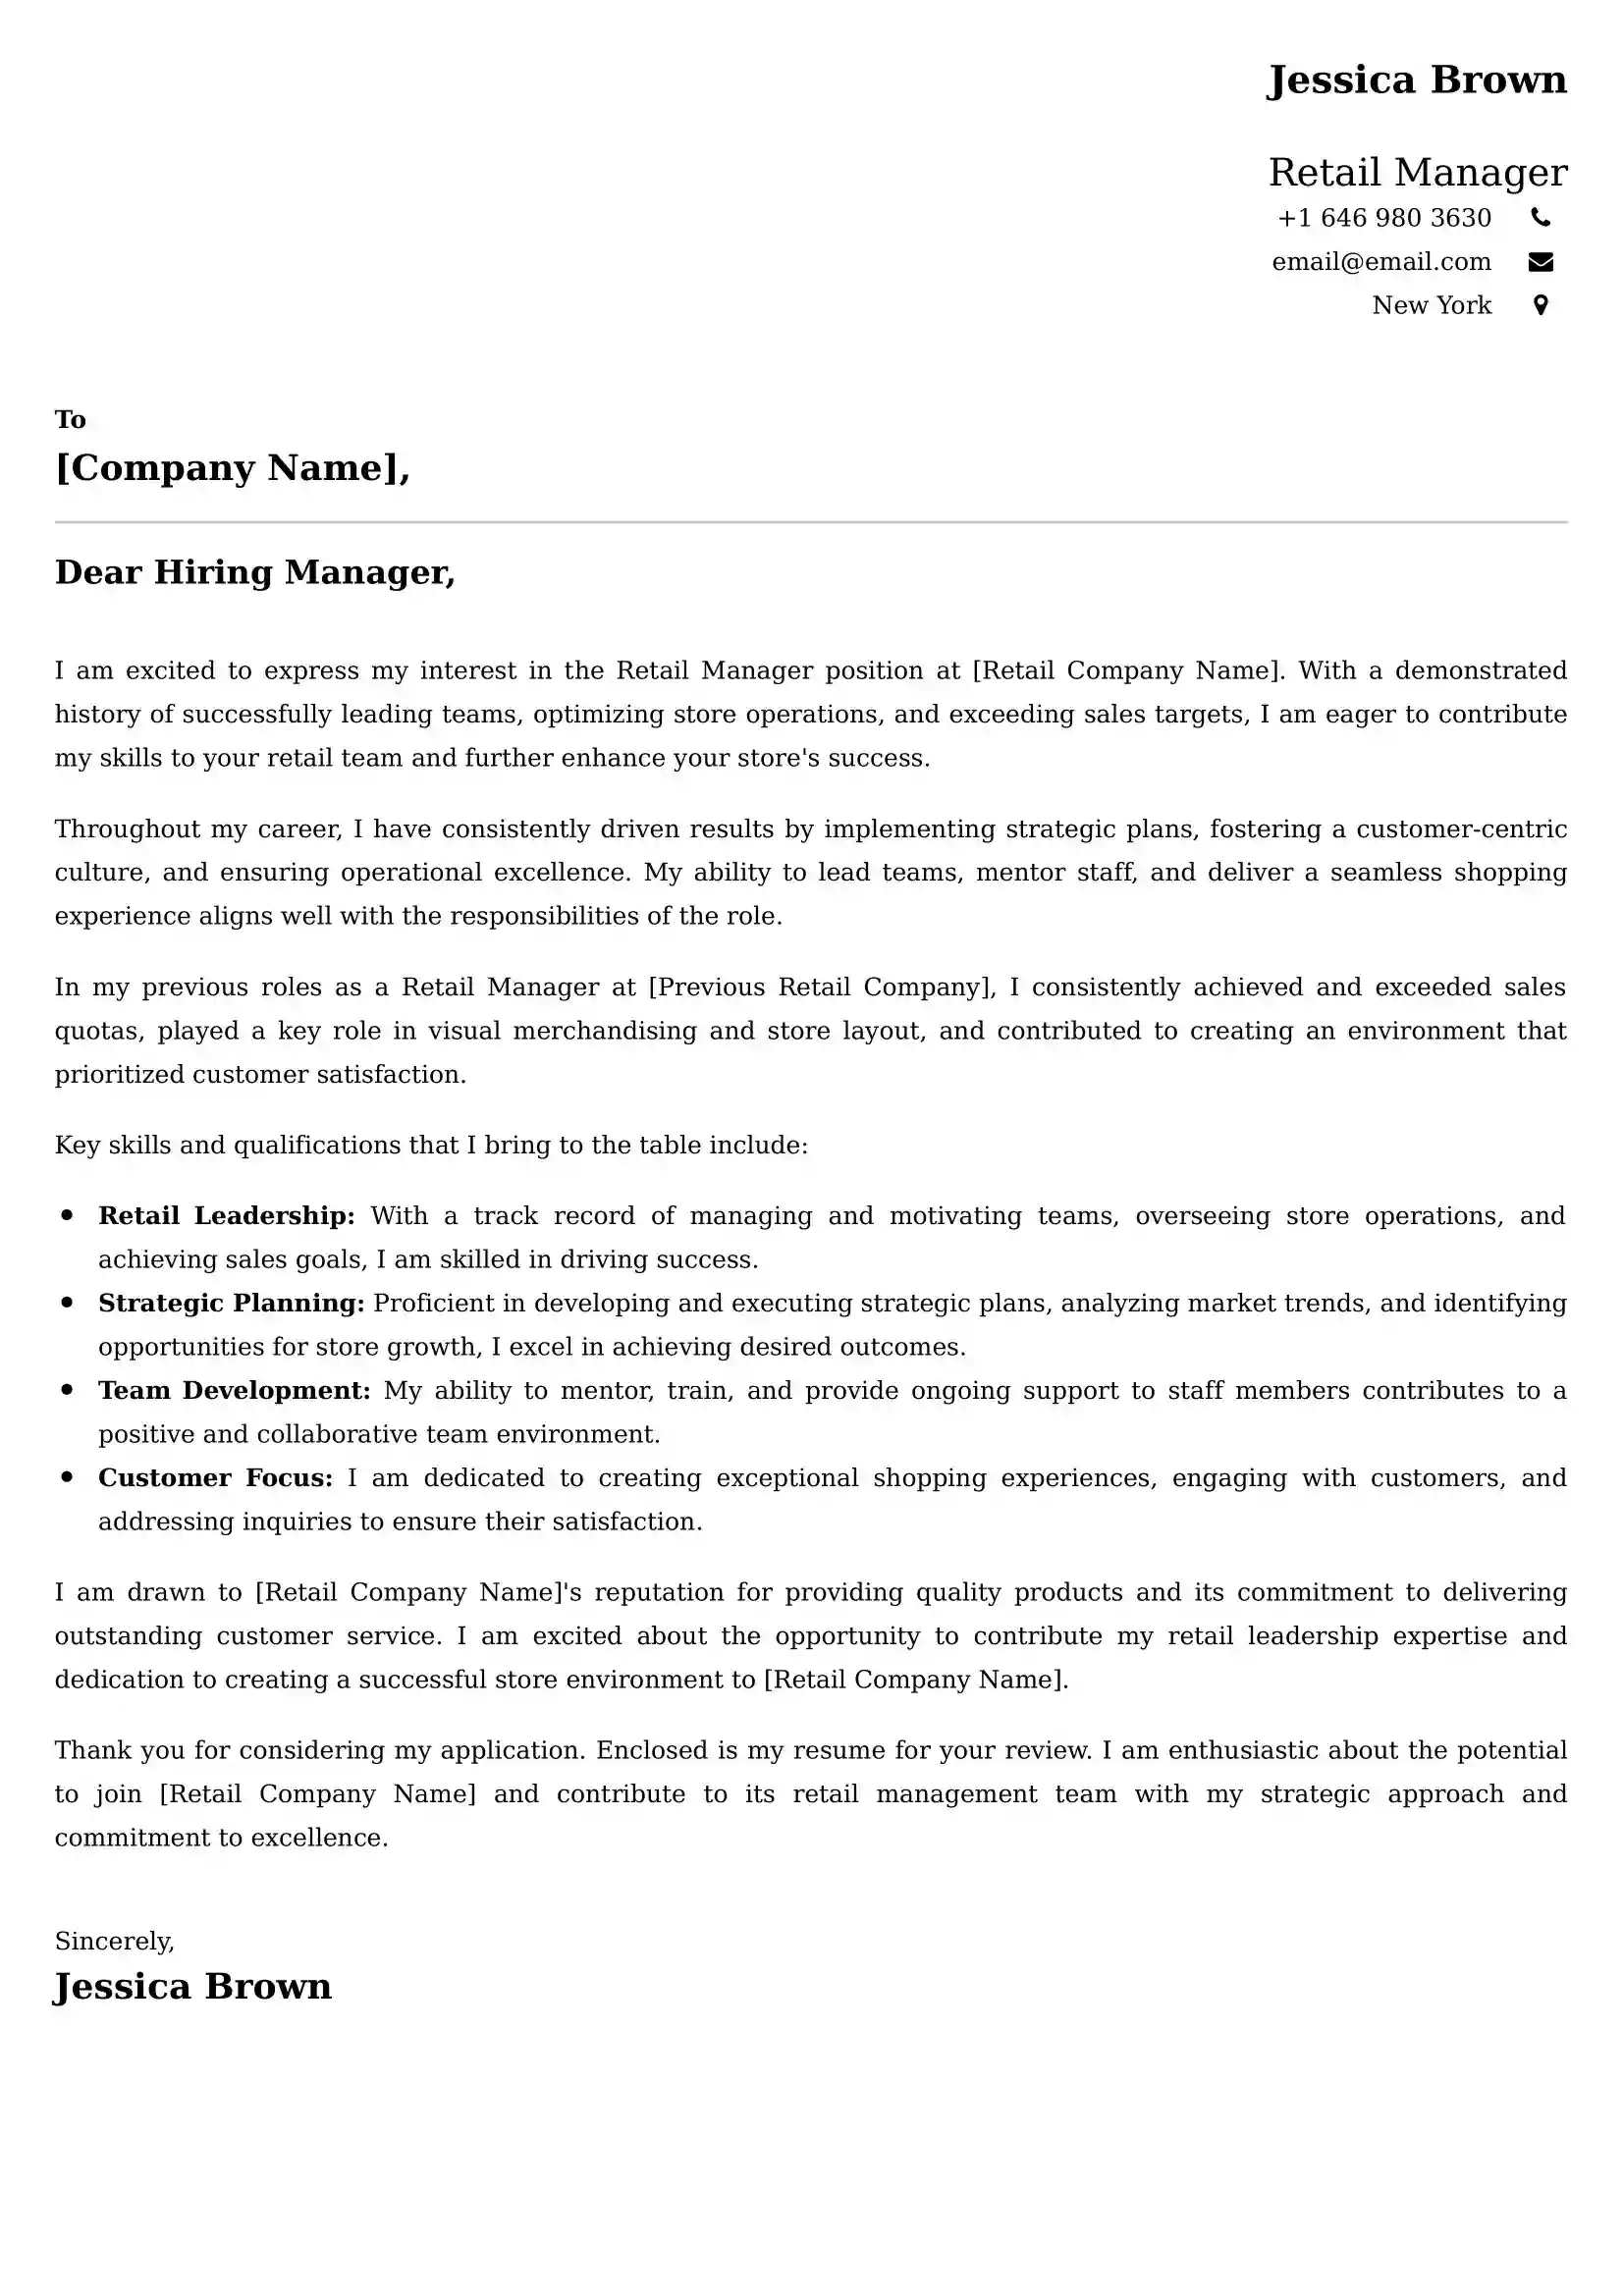 Retail Manager Cover Letter Examples -Latest Brazilian Templates